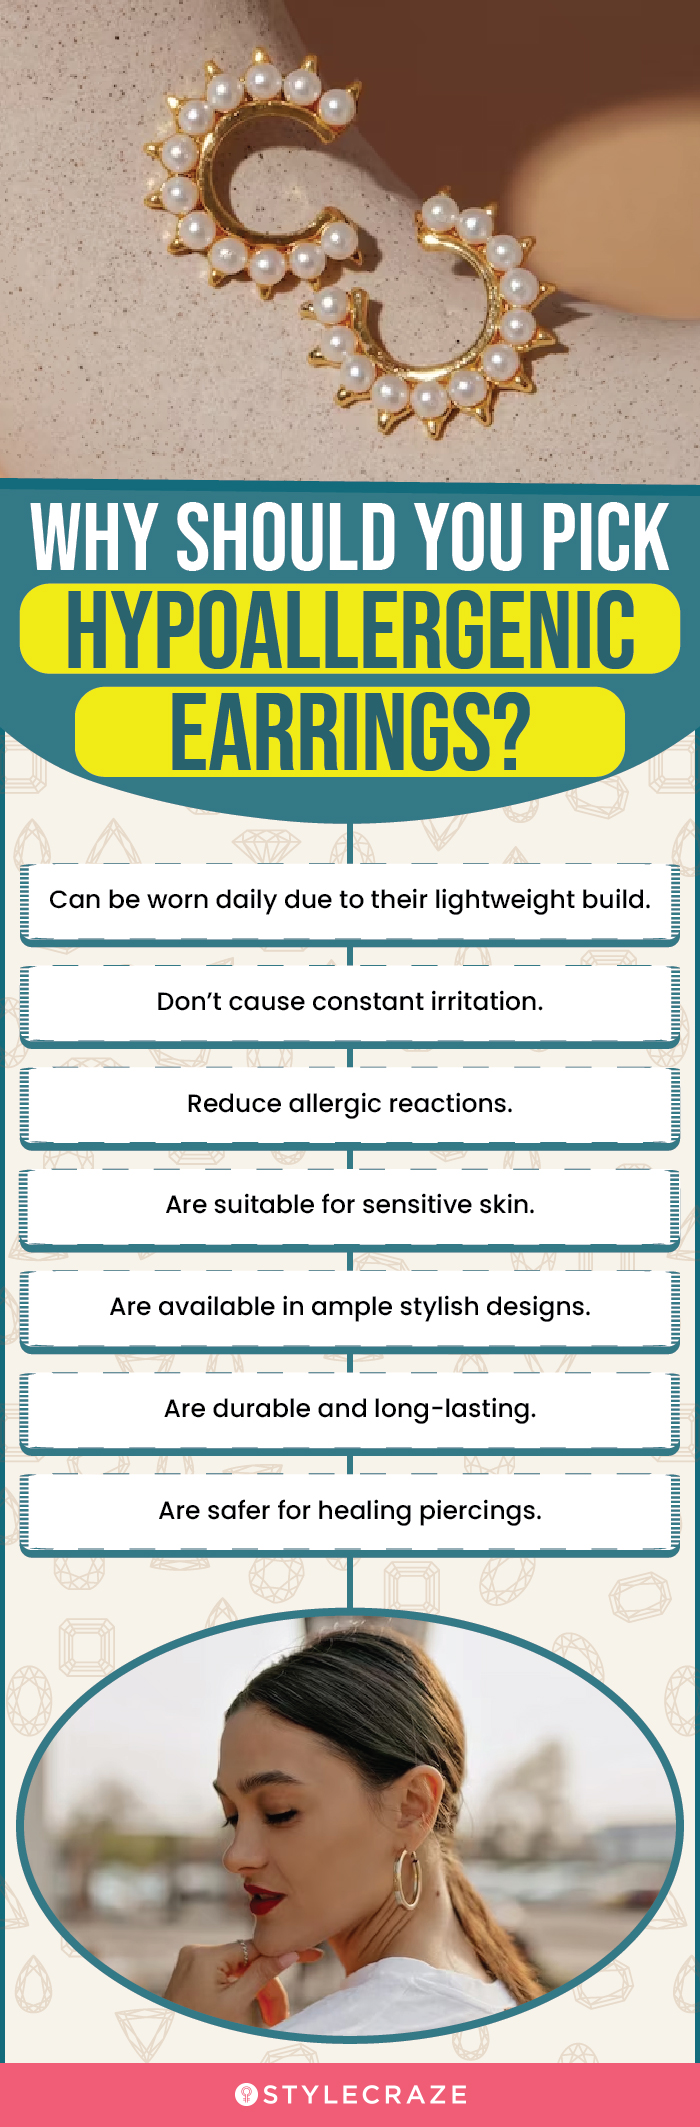 Why Should You Pick Hypoallergenic Earrings? (infographic)